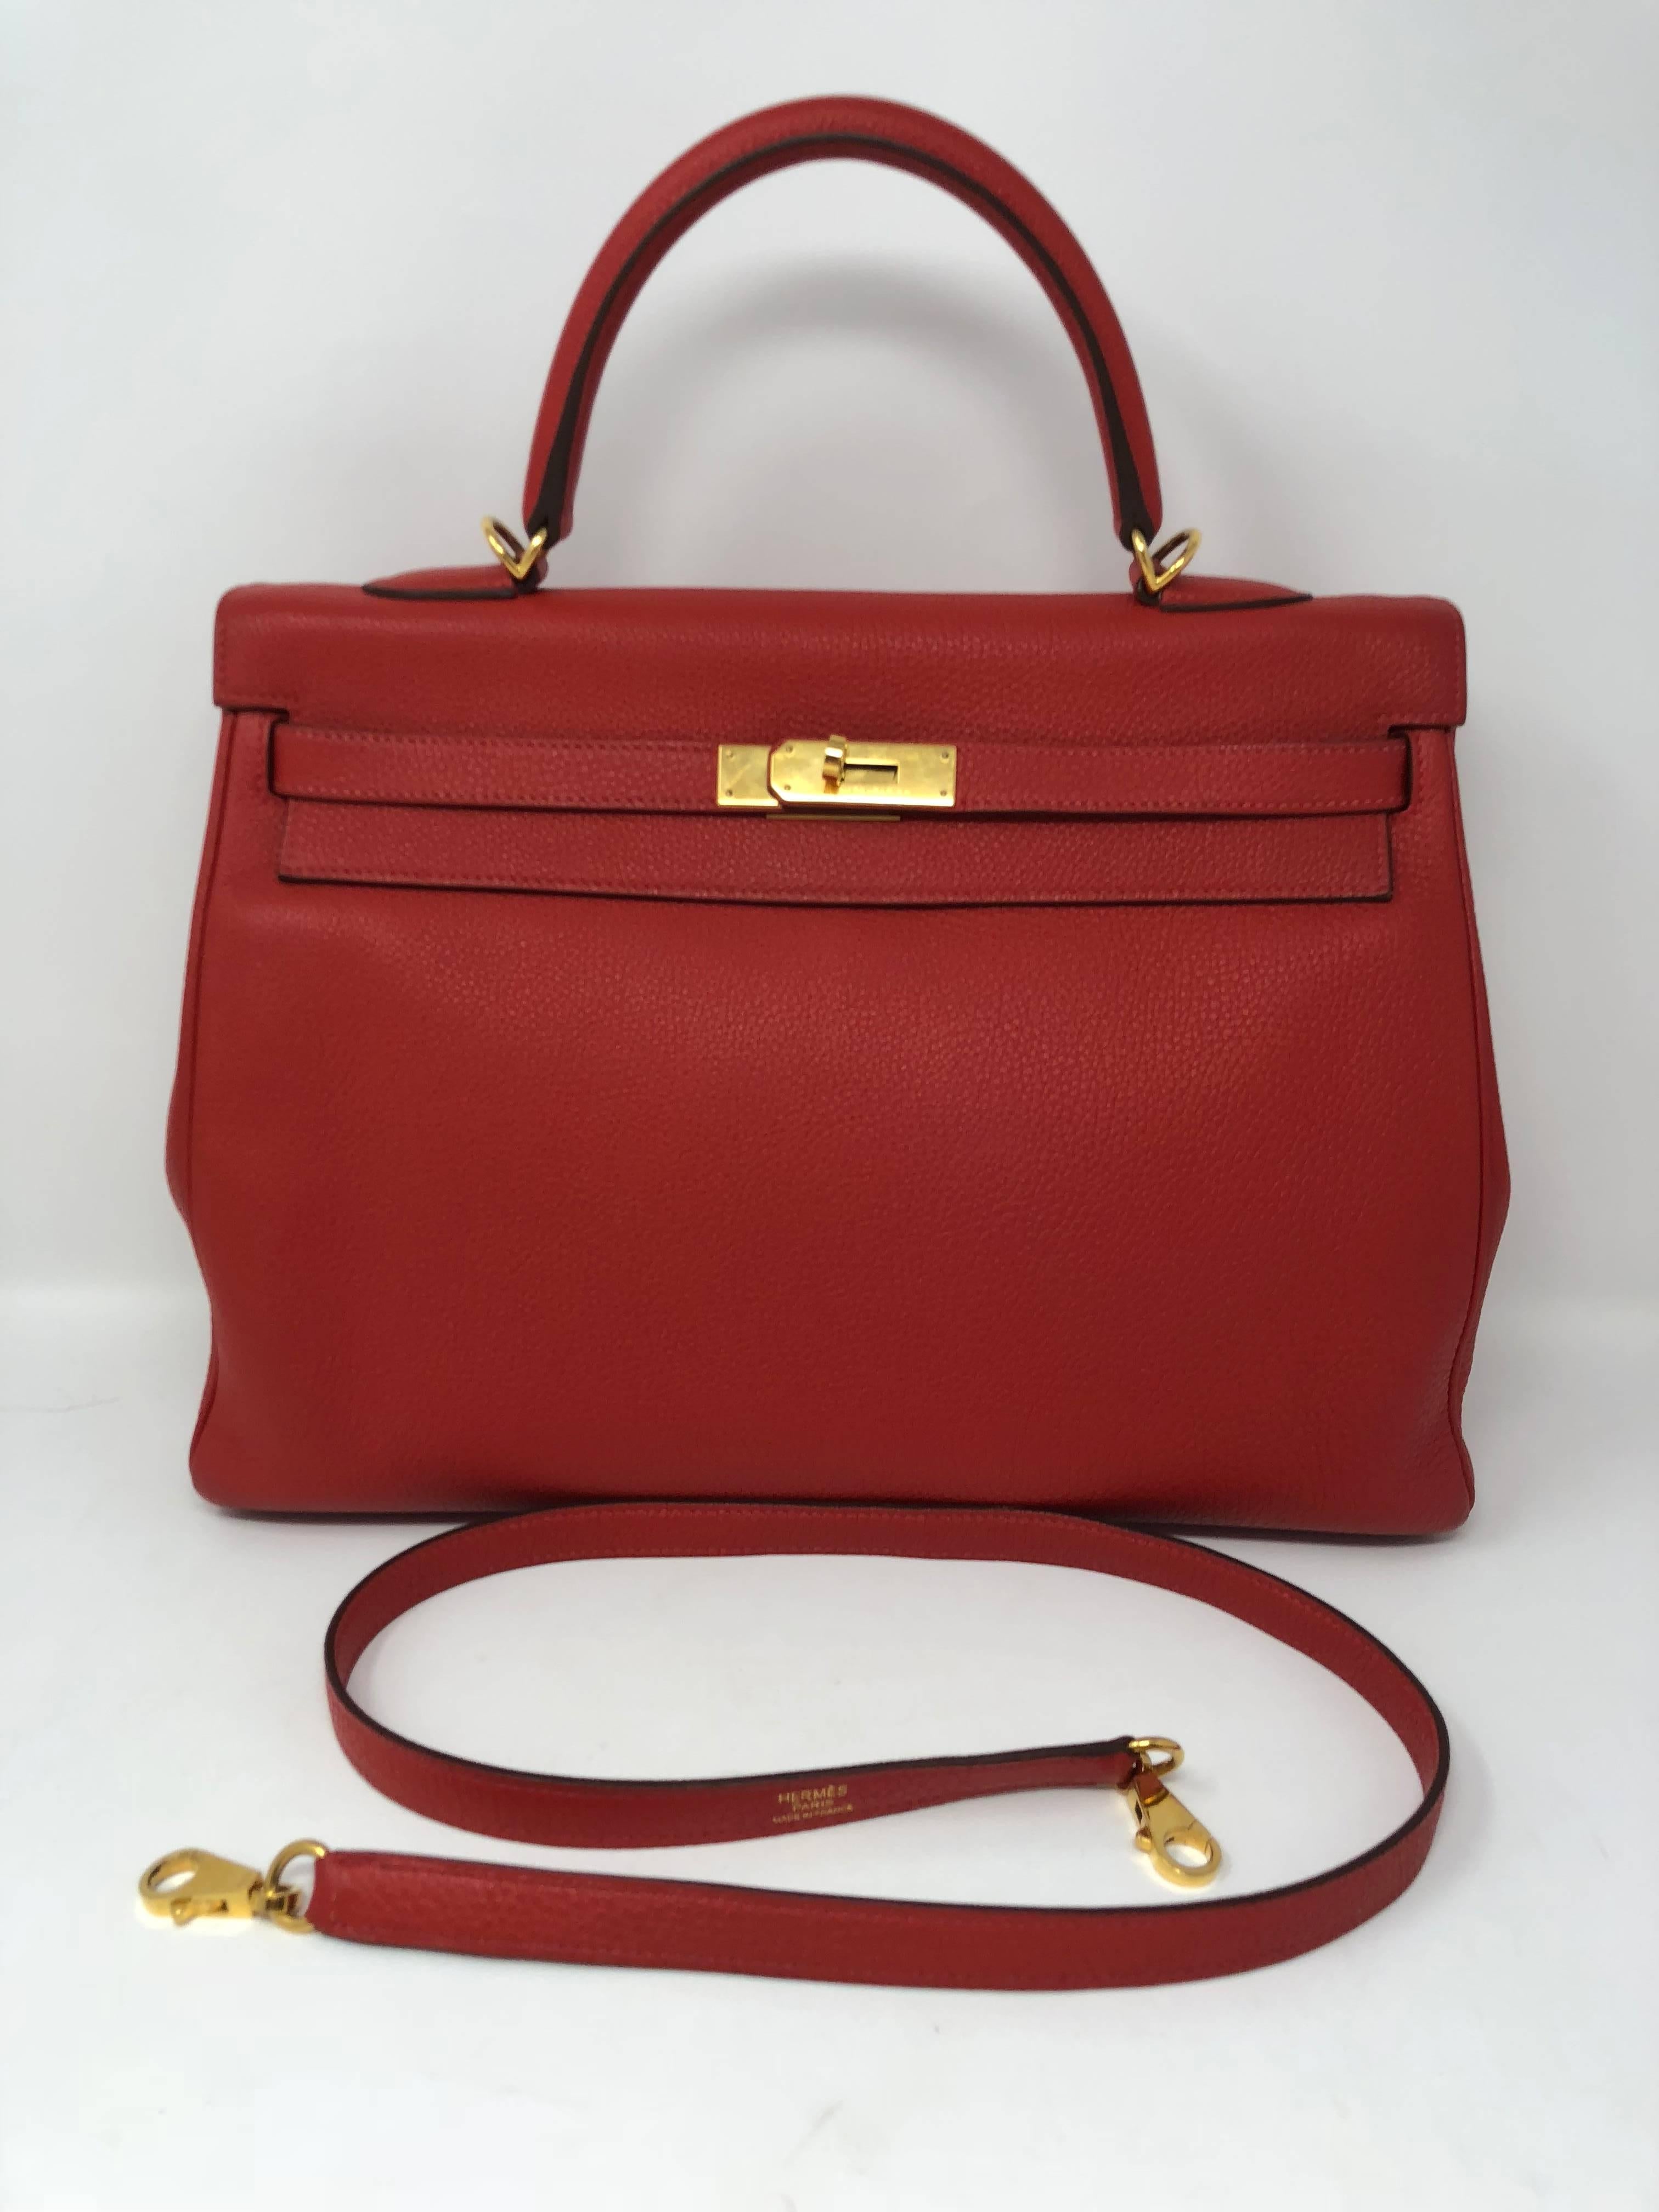 Hermes Kelly Retourne 35 Togo leather in Geranium red color with strap. Gold hardware. Made in 2012. Great condition. 